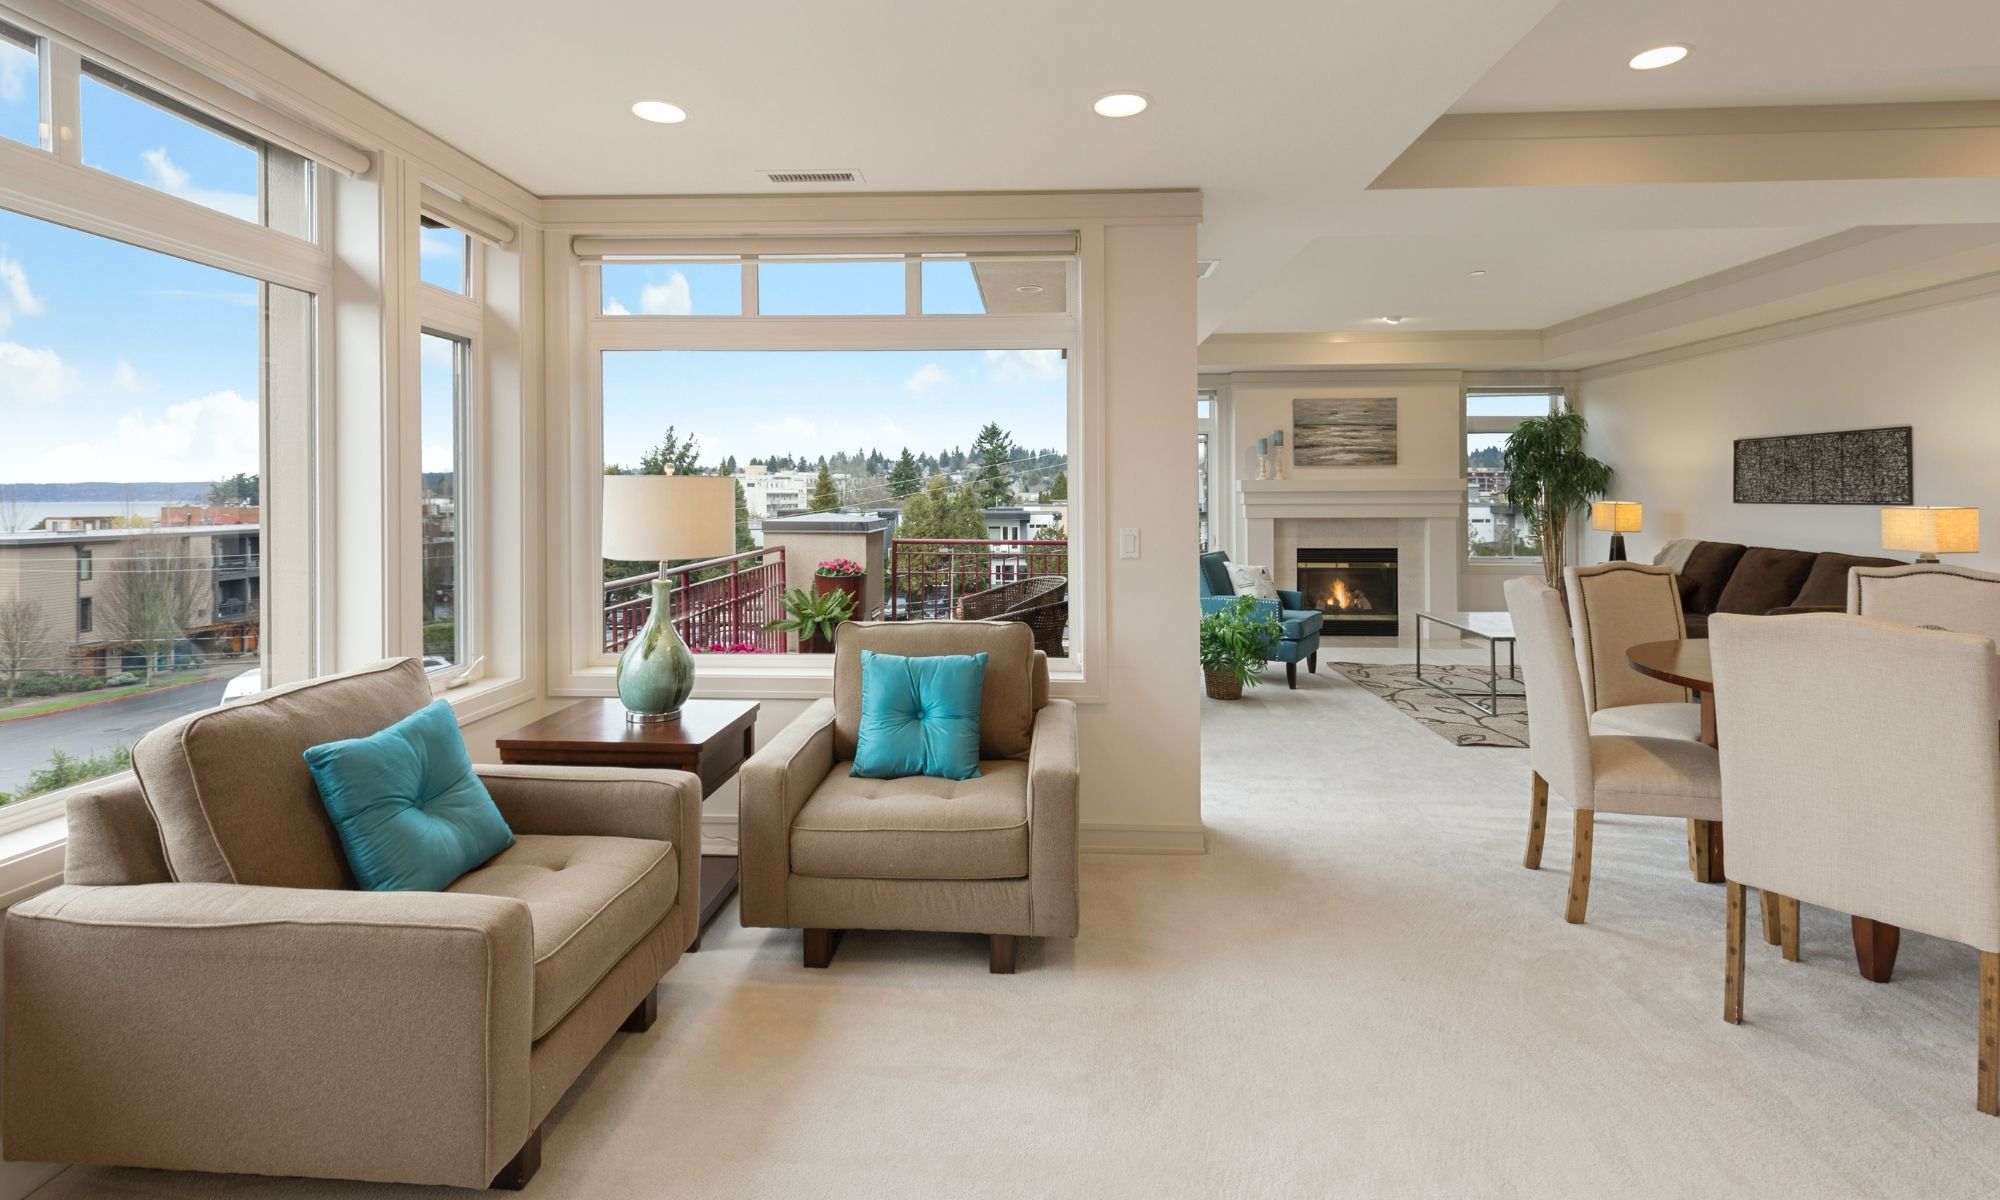 Home Staging Tips for Quick Resale featured image